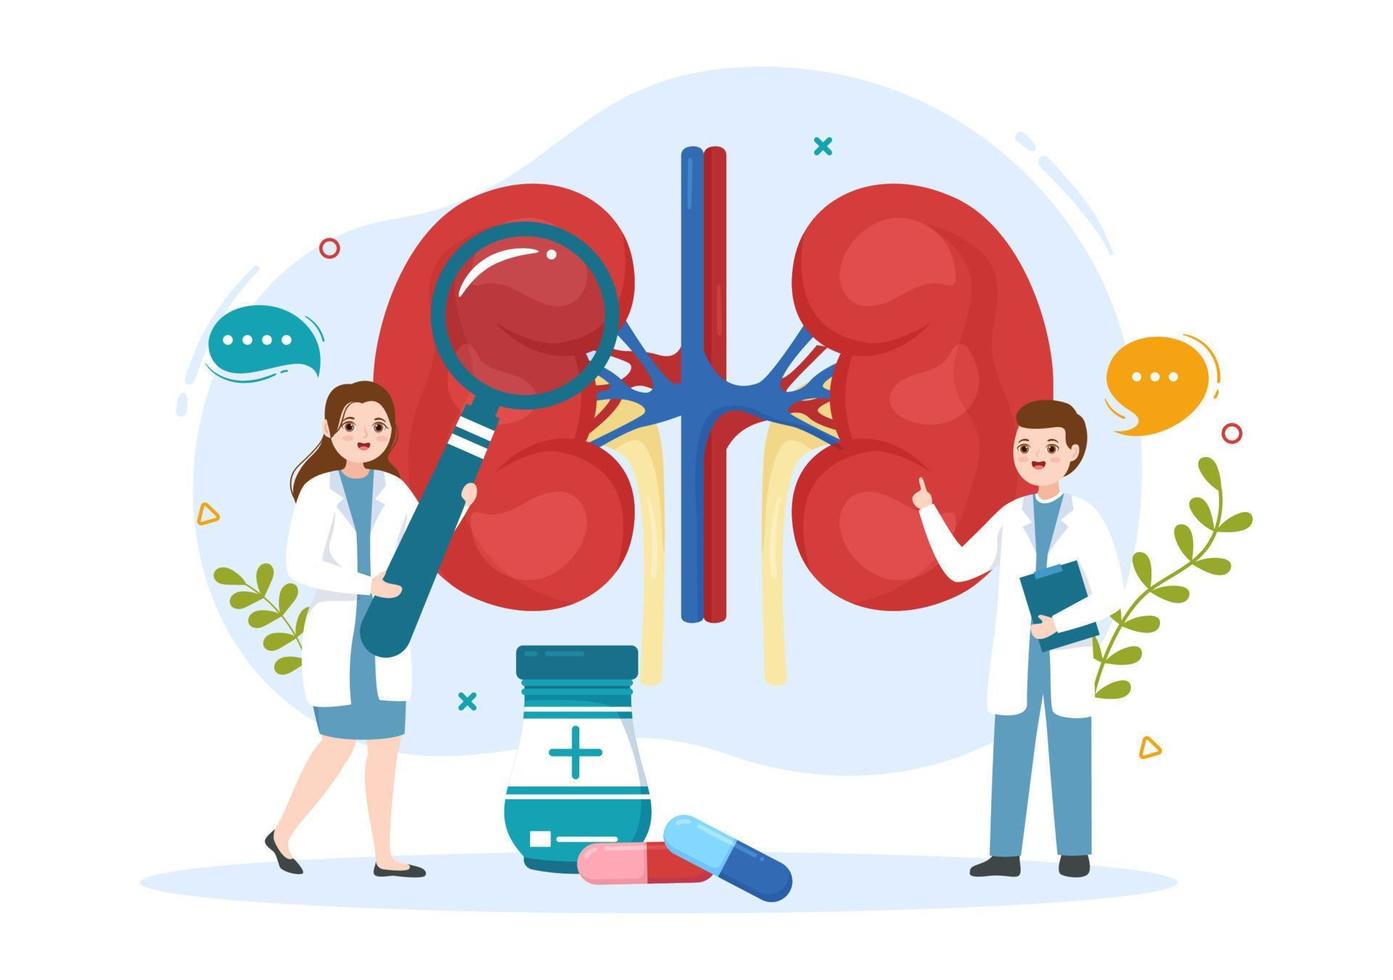 Nephrologist Illustration with Cardiologist, Proctologist and Treat Kidneys Organ in Flat Cartoon Hand Drawn for Web Banner or Landing Page Templates vector